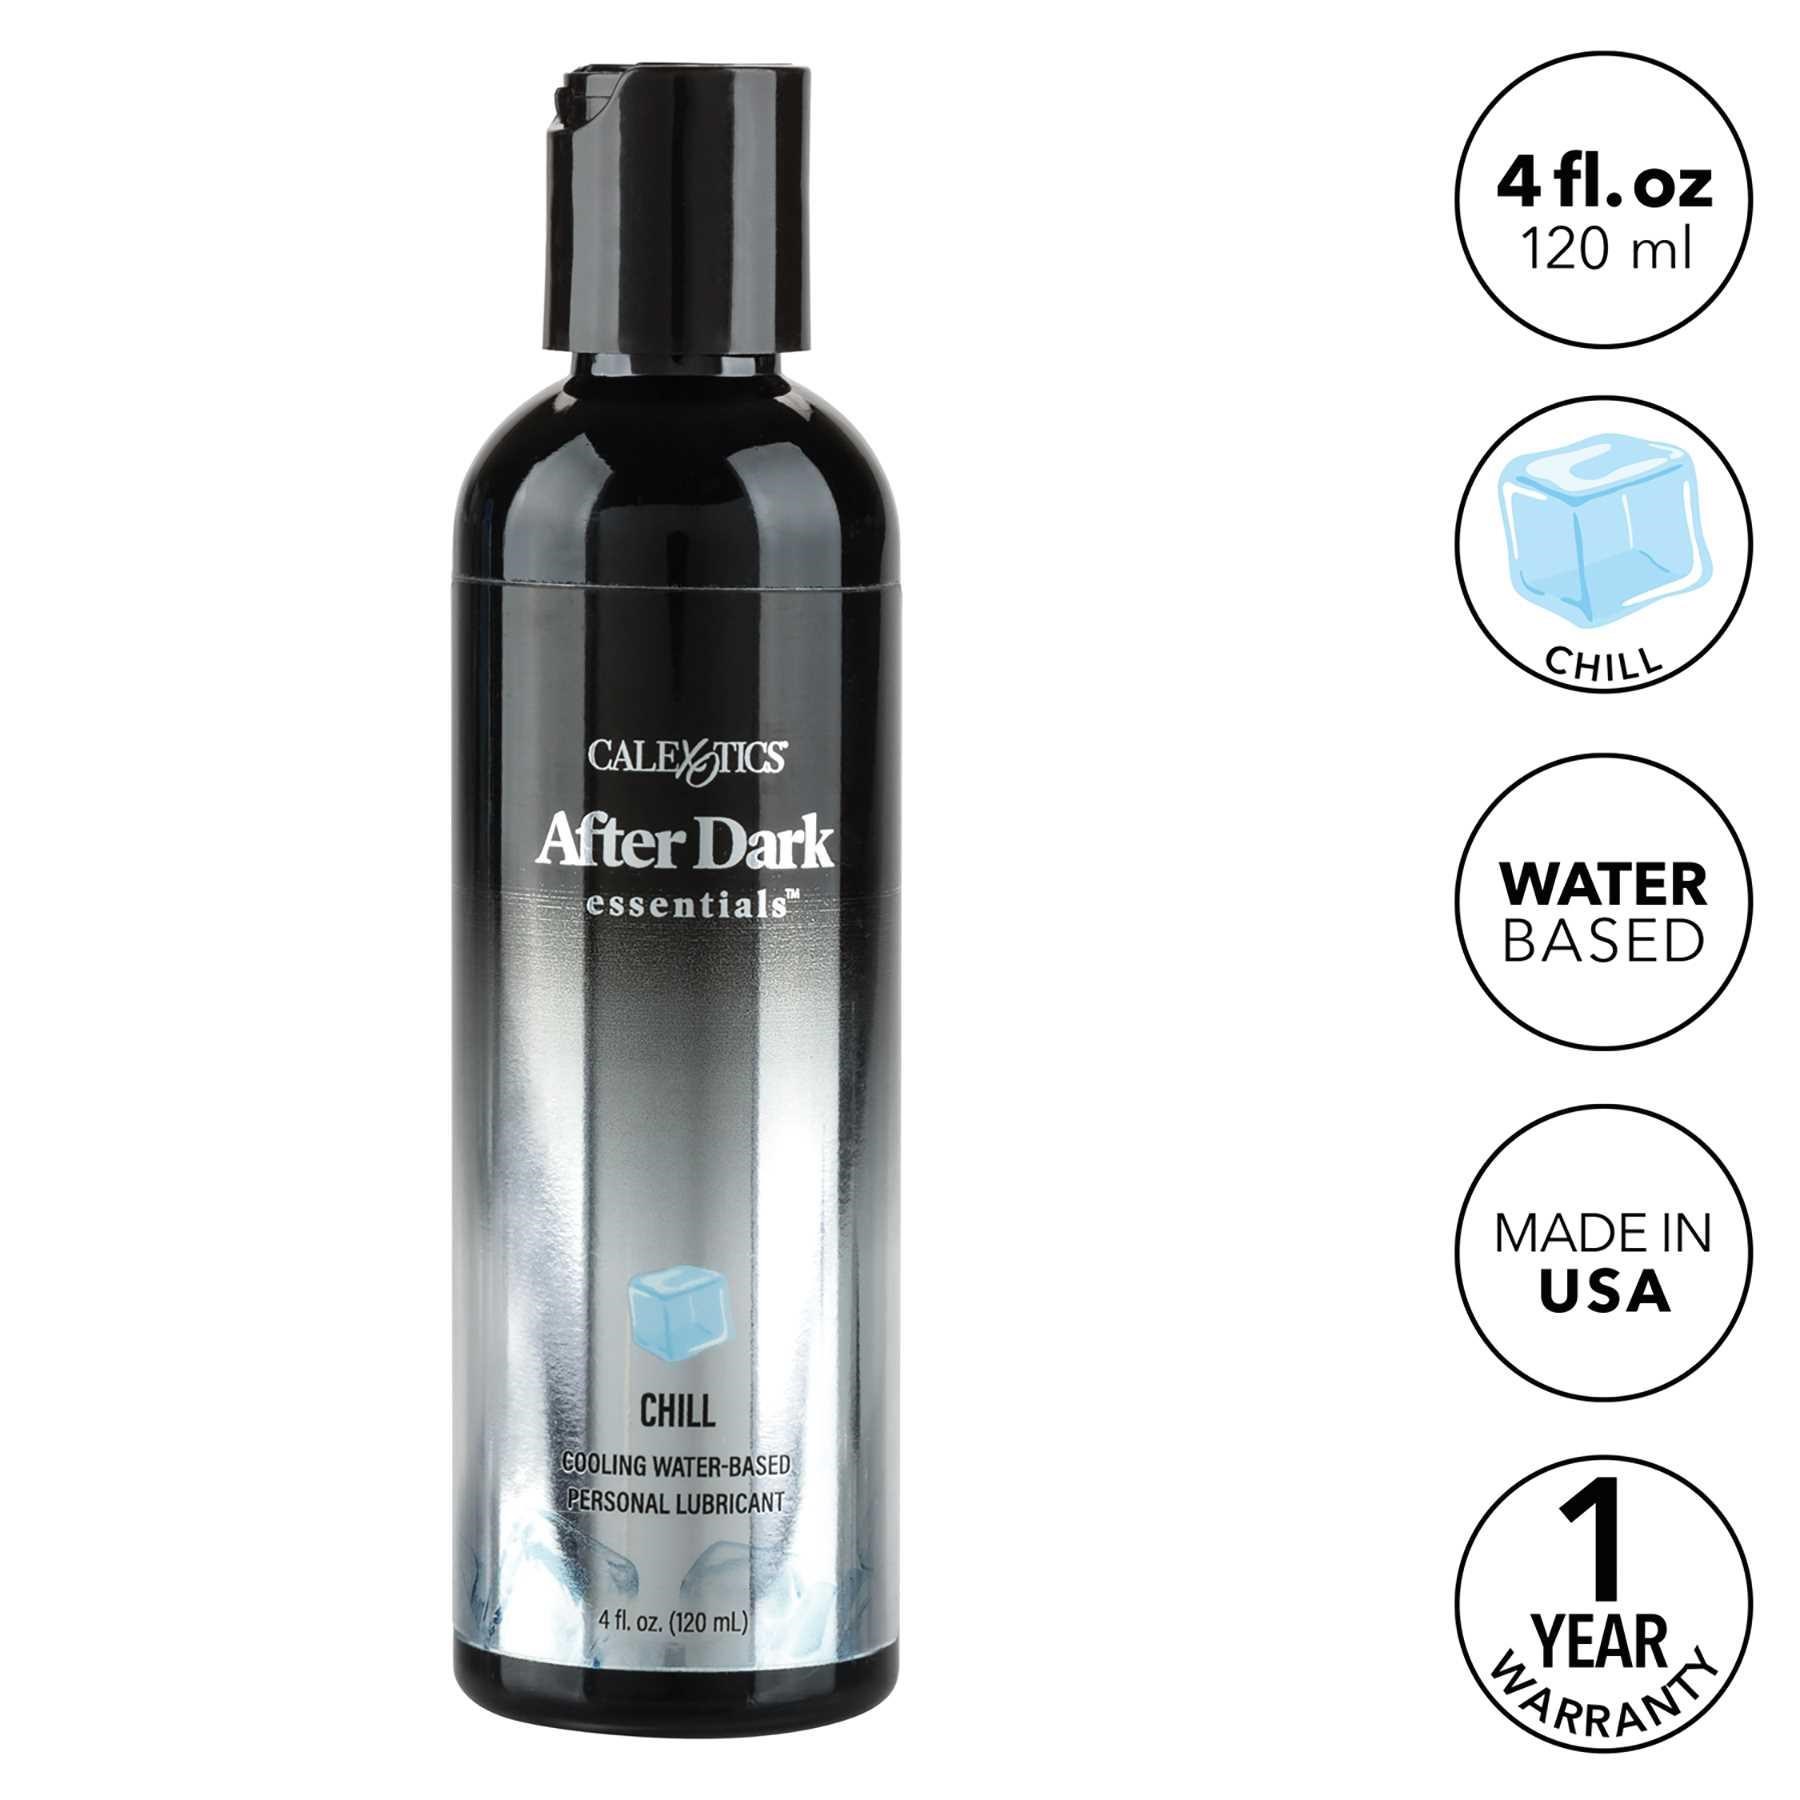 AFTER DARK ESSENTIALS CHILL LUBRICANT bullet points